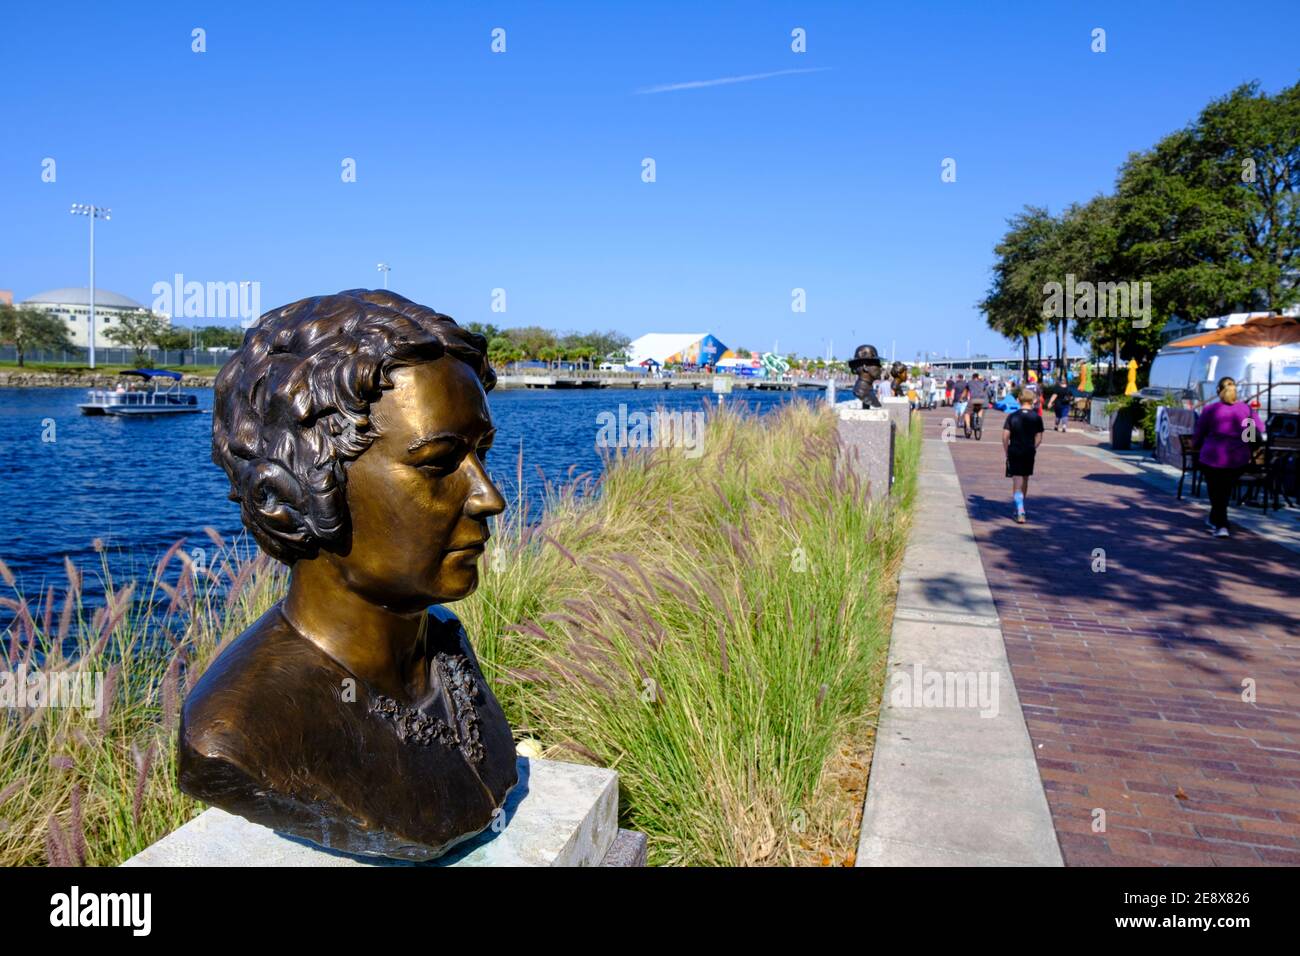 Line of busts on the Tampa Riverwalk - Super Bowl LV (55) Tampa, Florida Stock Photo